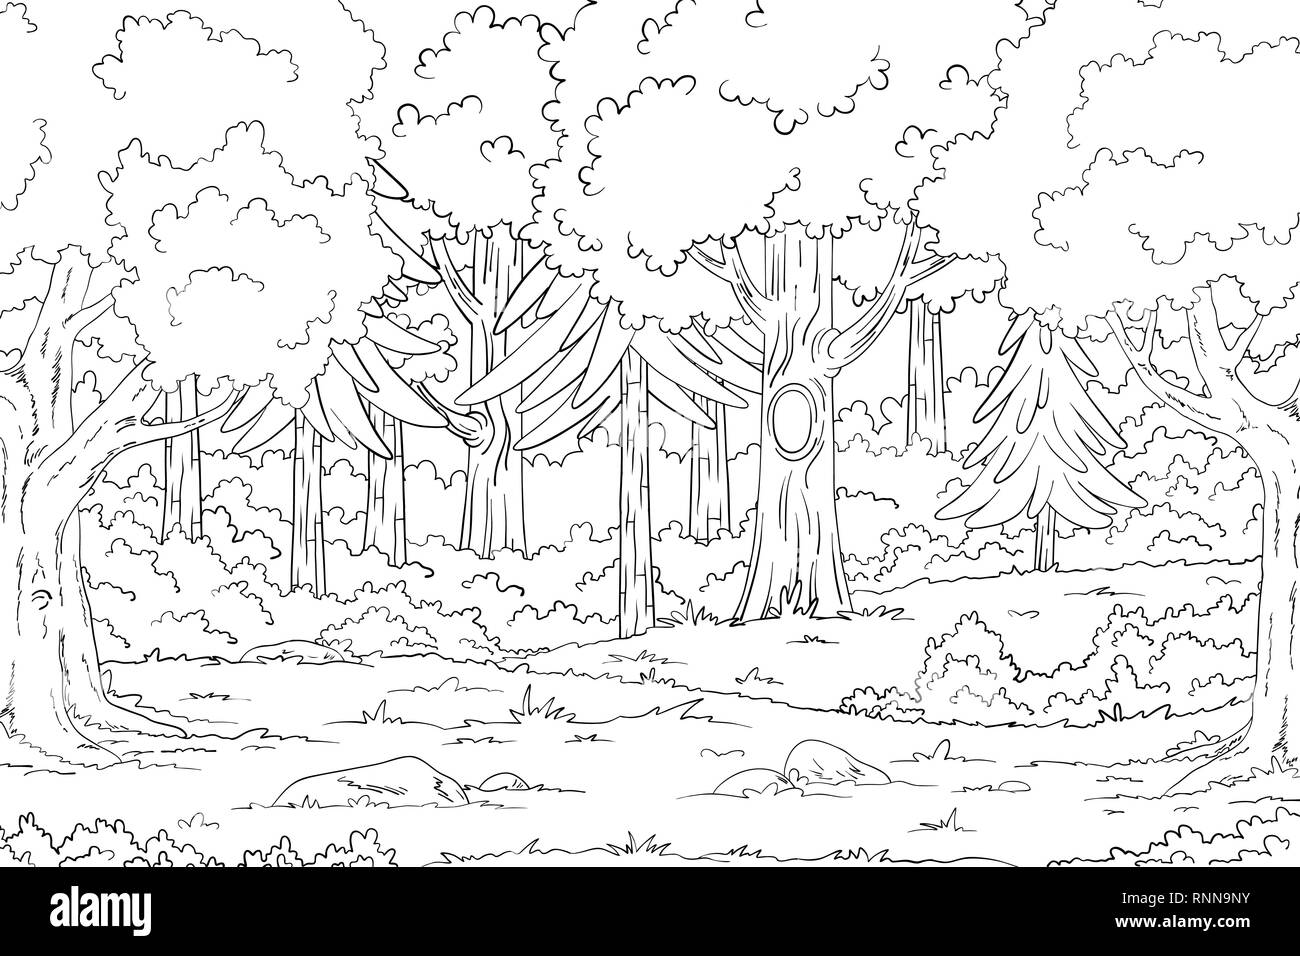 Coloring book landscape. Hand draw vector illustration with separate layers. Stock Vector